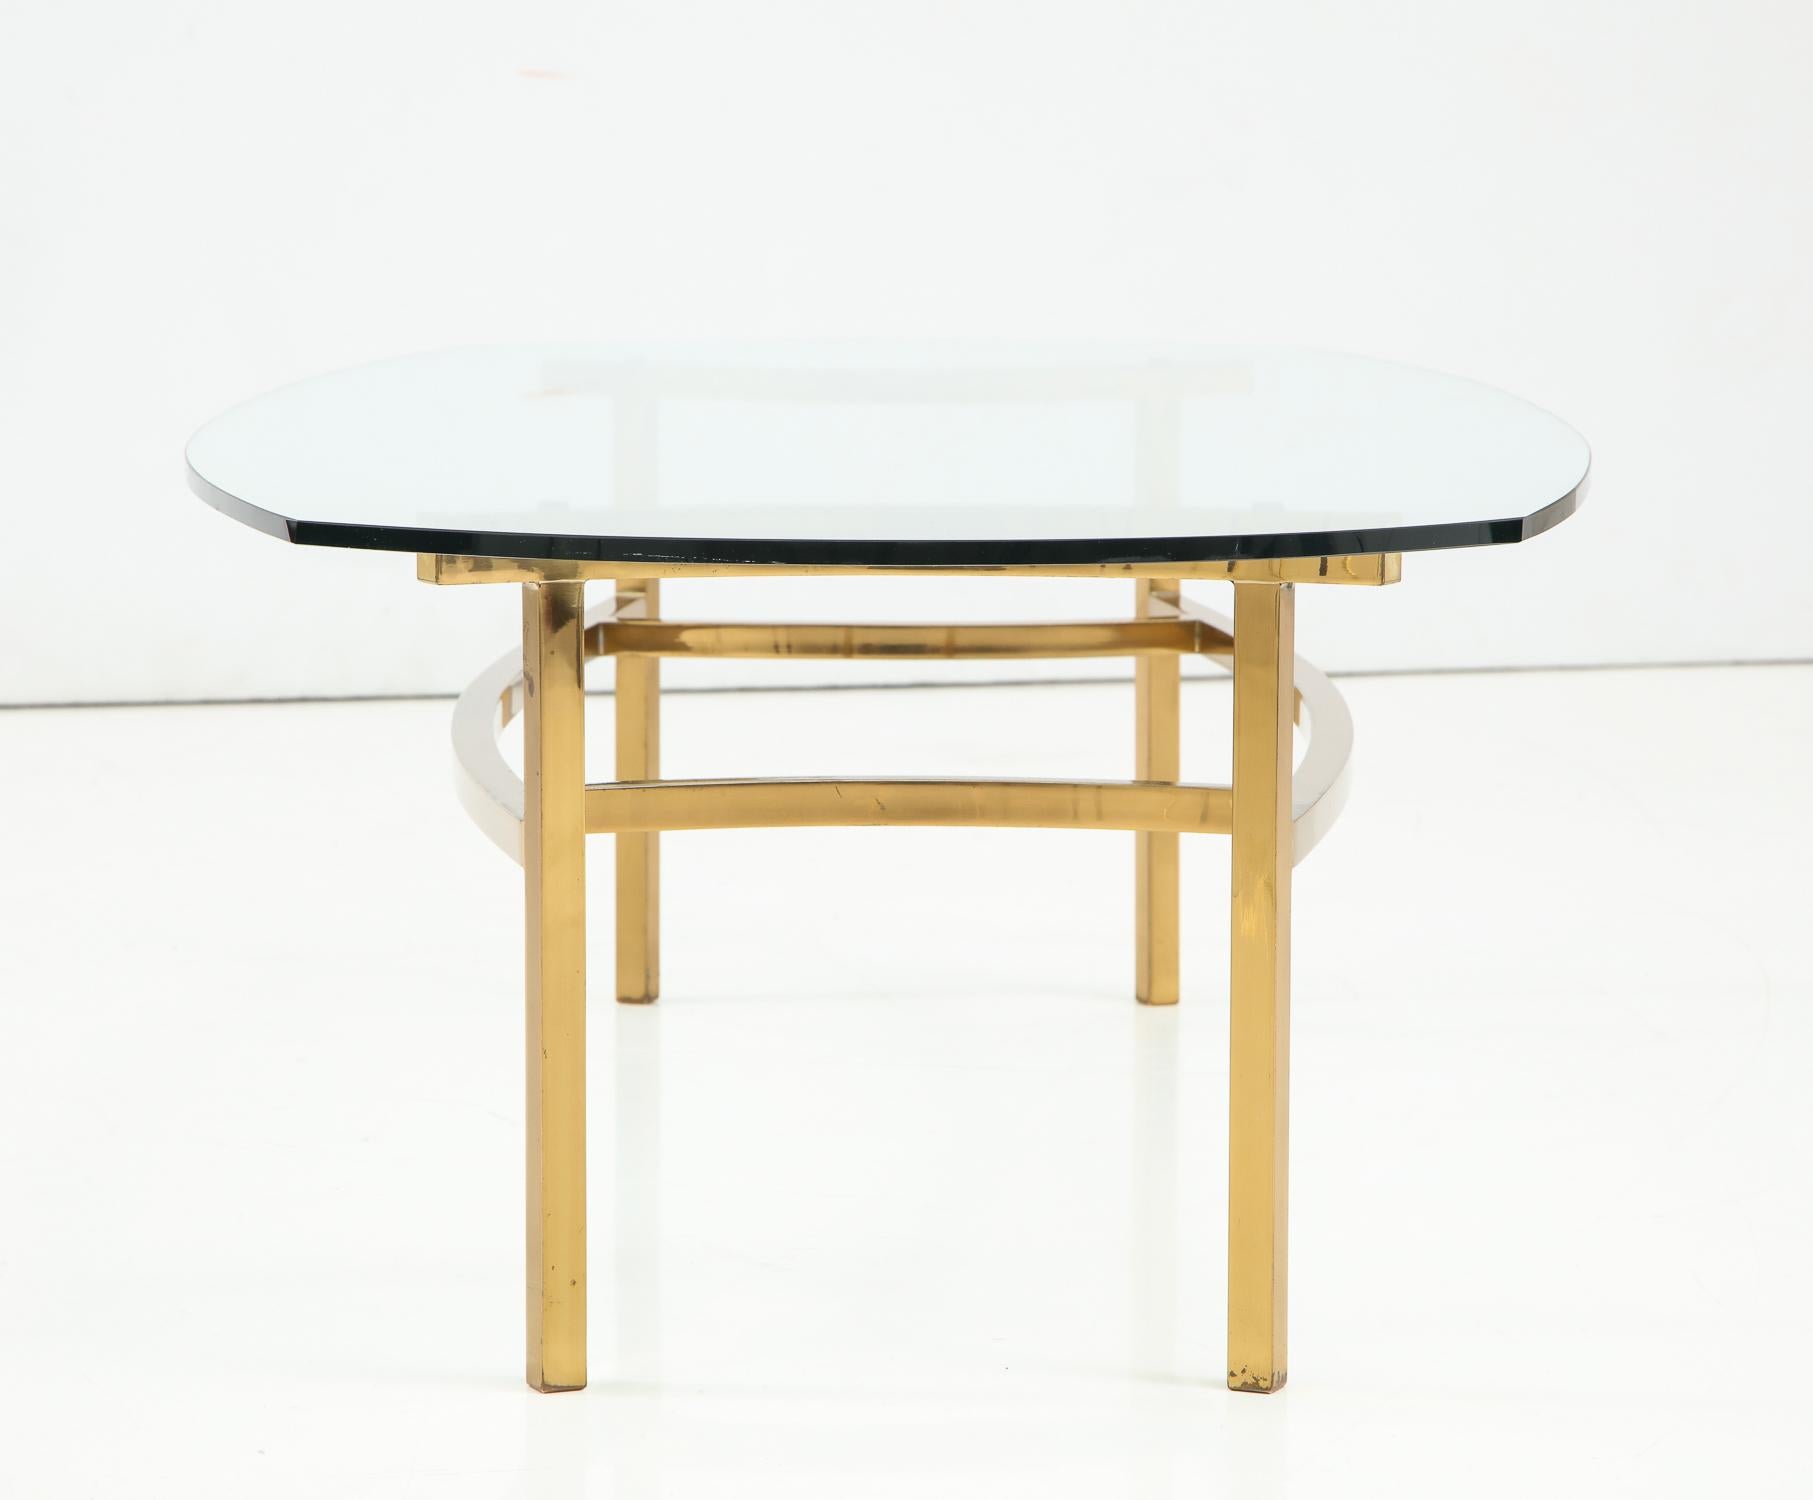 Mid-20th Century Bertha Schaefer Brass and Glass Cocktail Table for M. Singer and Sons For Sale